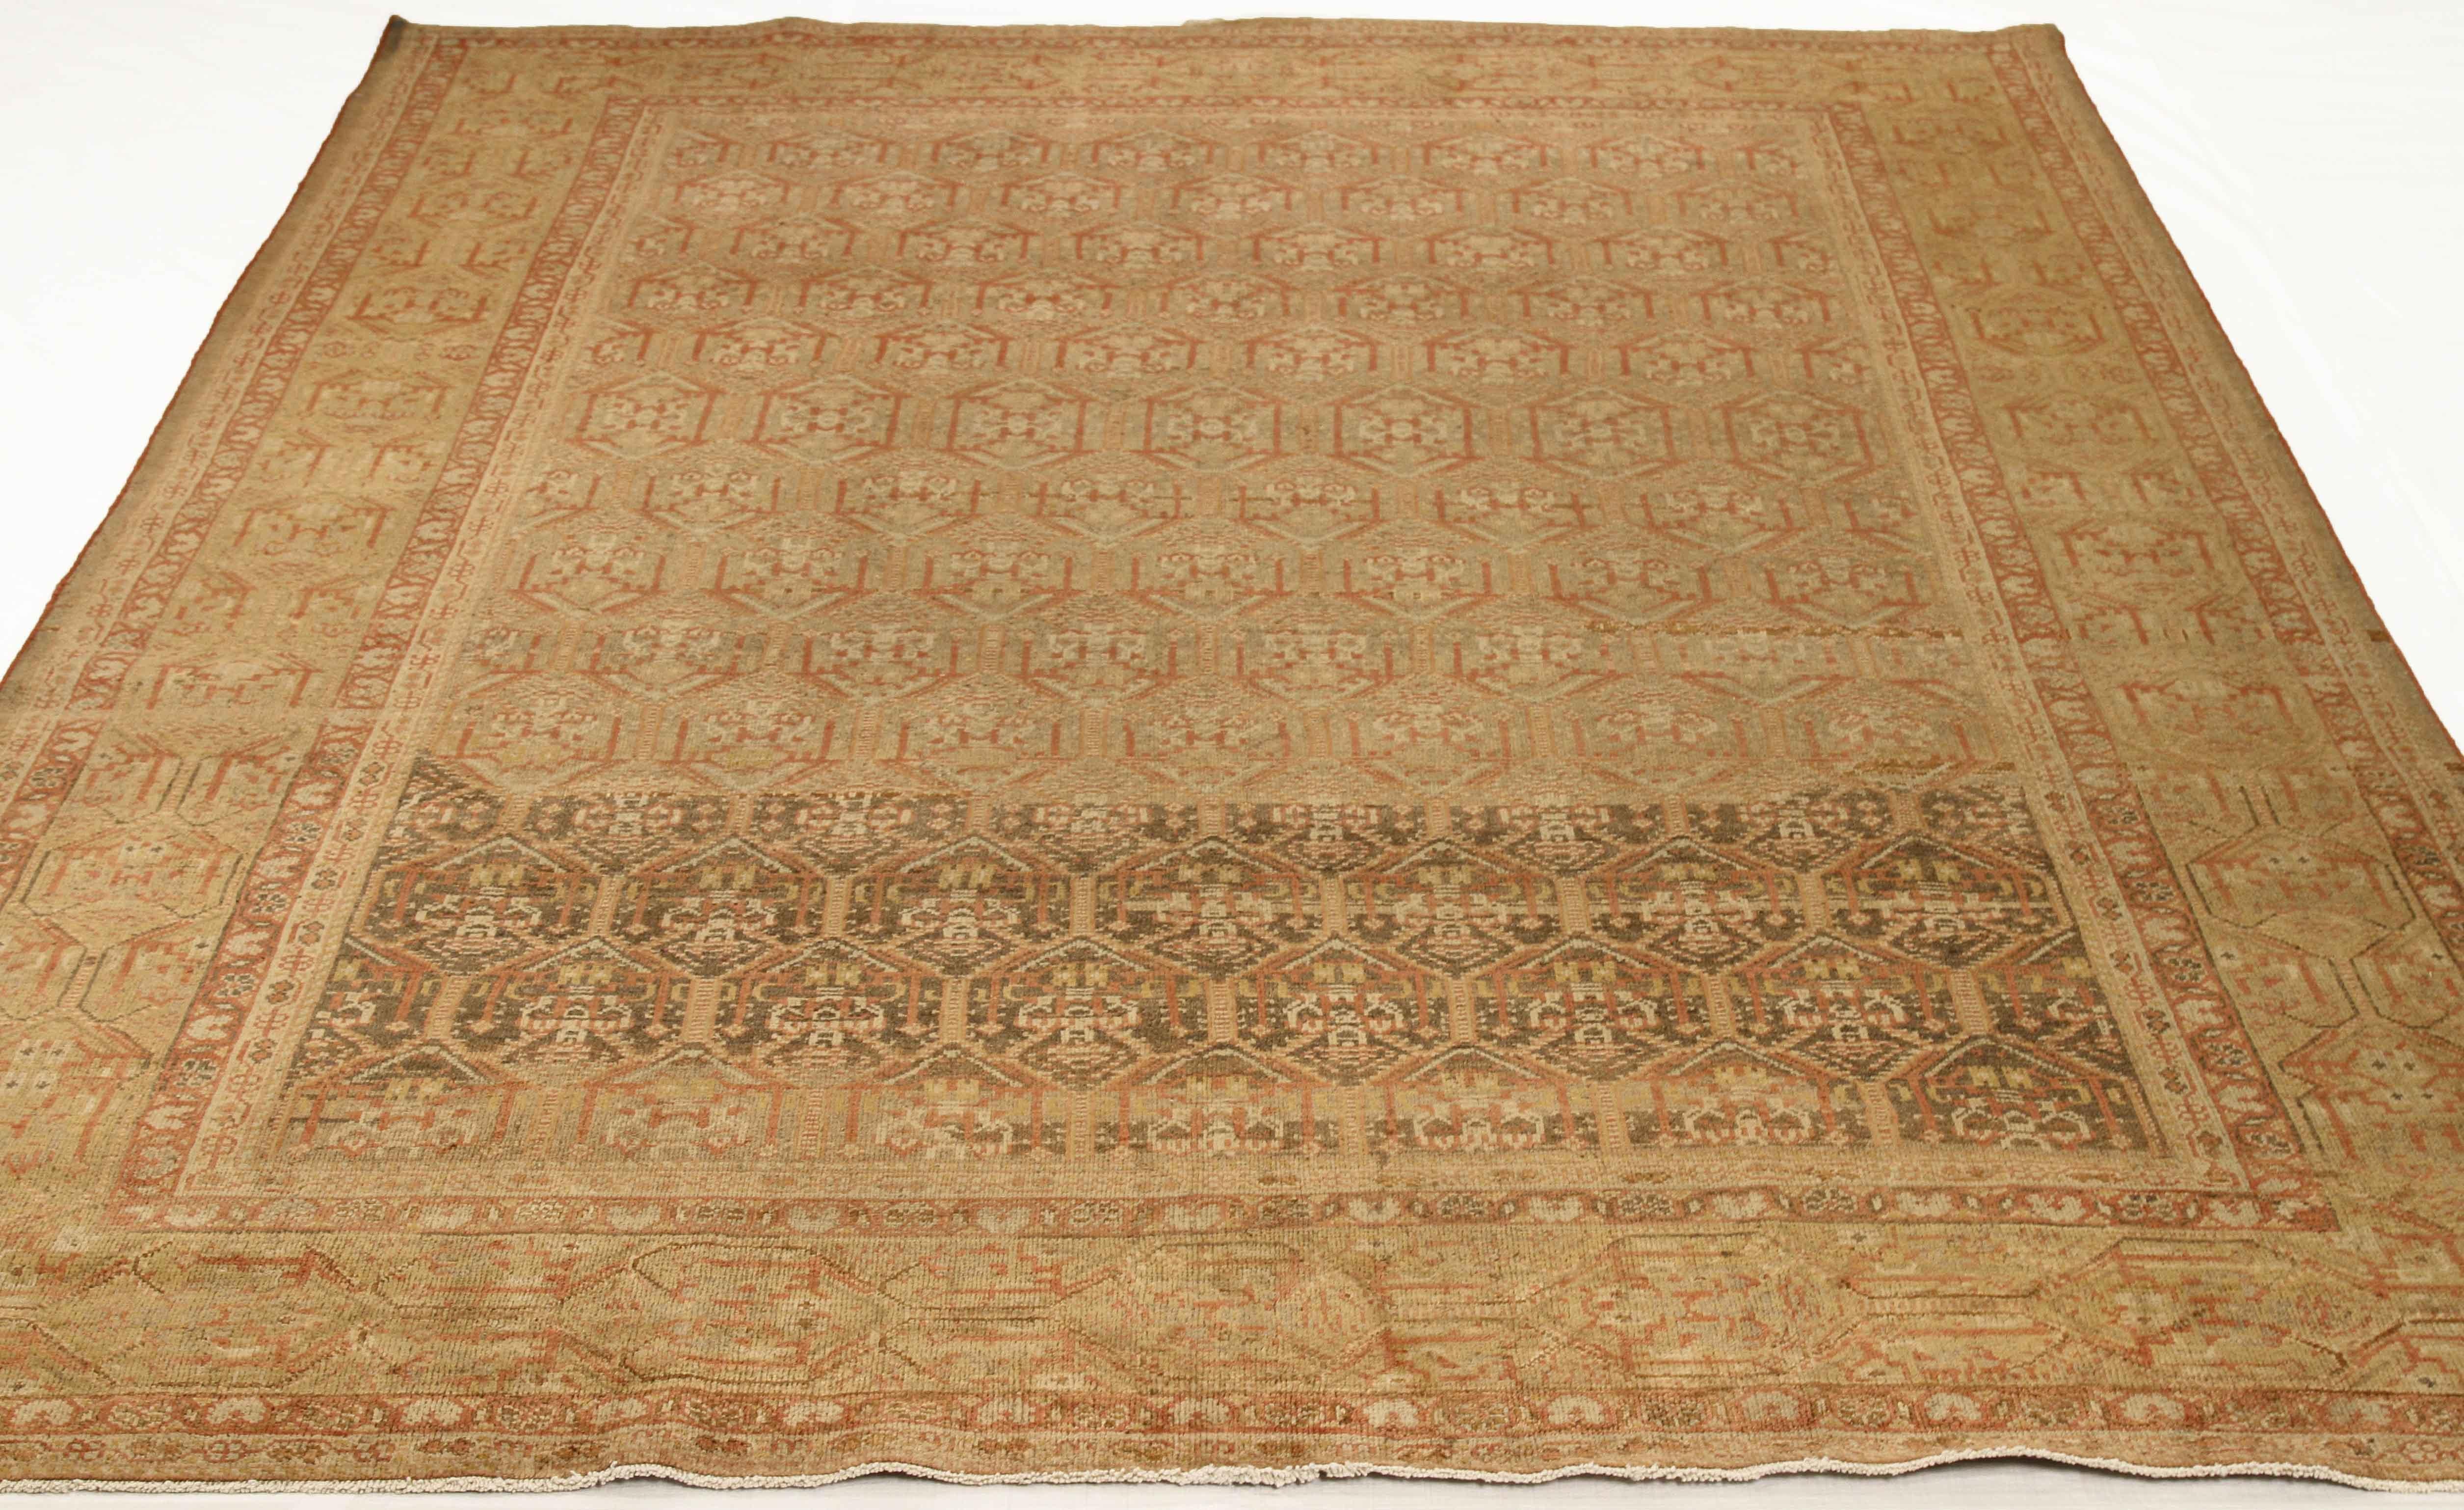 Antique Persian rug handwoven from the finest sheep’s wool and colored with all-natural vegetable dyes that are safe for humans and pets. It’s a traditional Mahal design featuring floral details in beige and brown over an ivory field. It’s a lovely